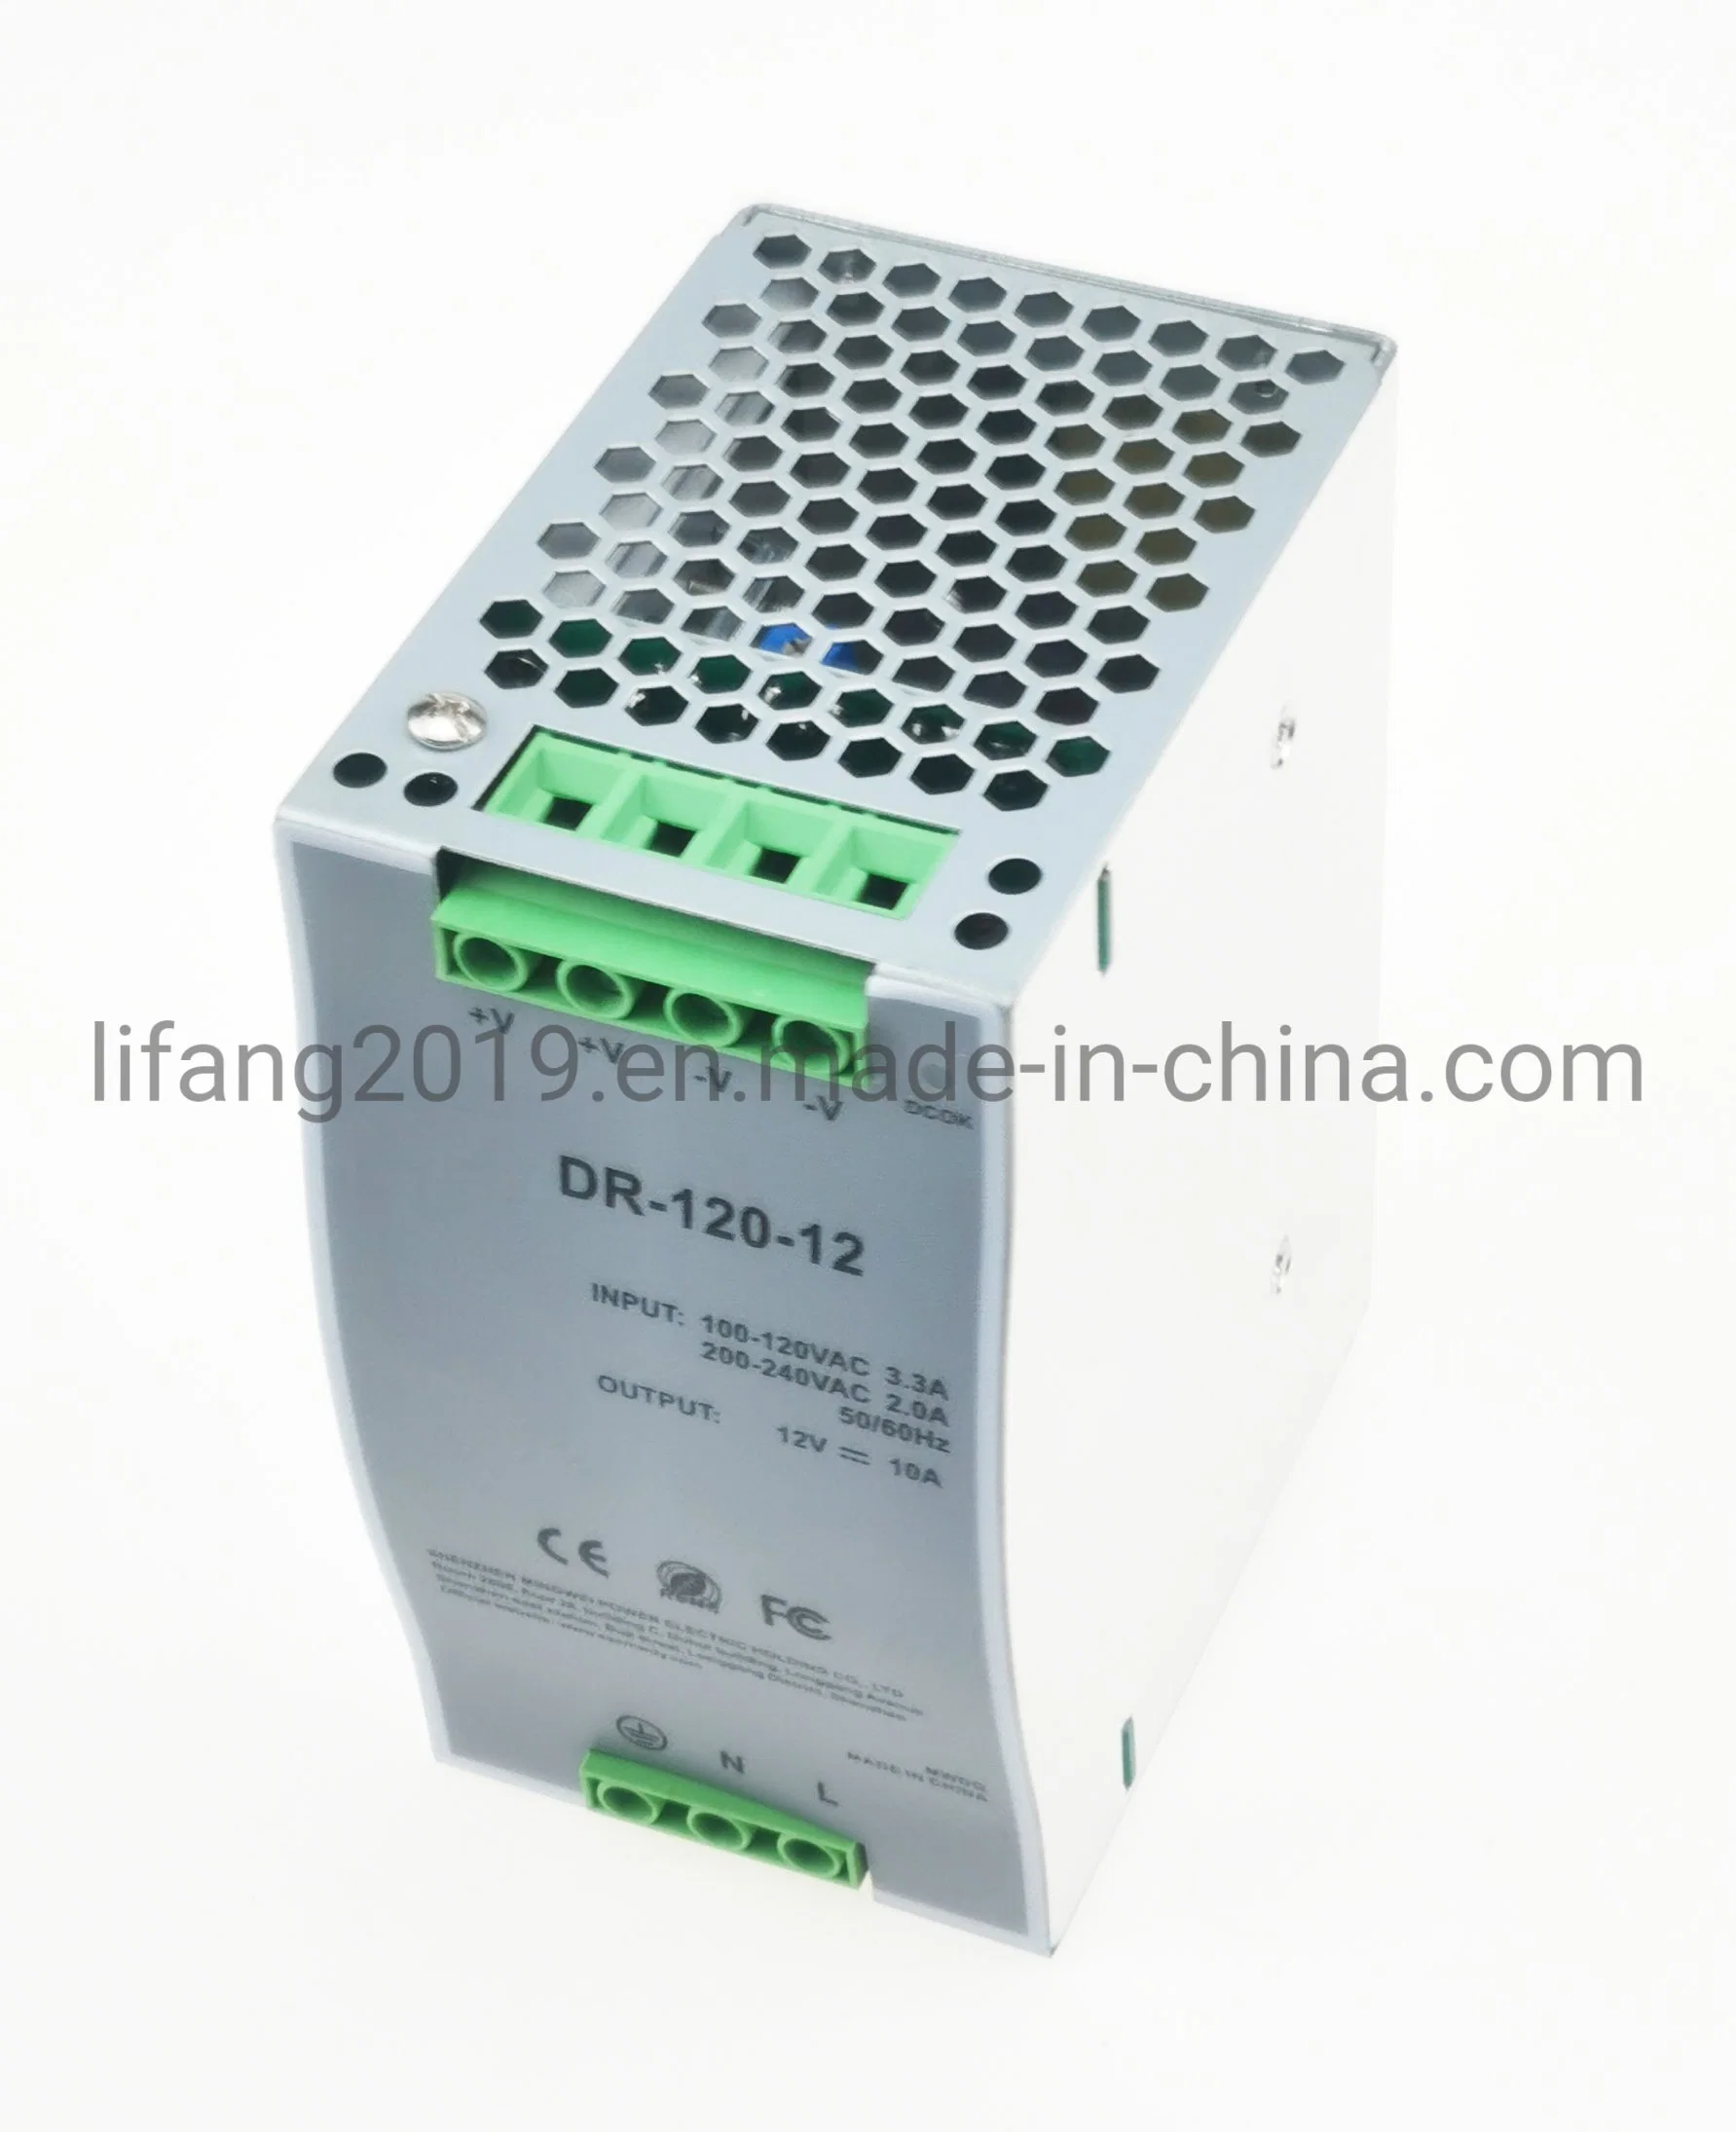 Dr-120-12 DIN Rail Type Switching Power Supply, CE Proved High Qualiyt Switching Power Supply, ISO9001 Passed Switching Power Supply